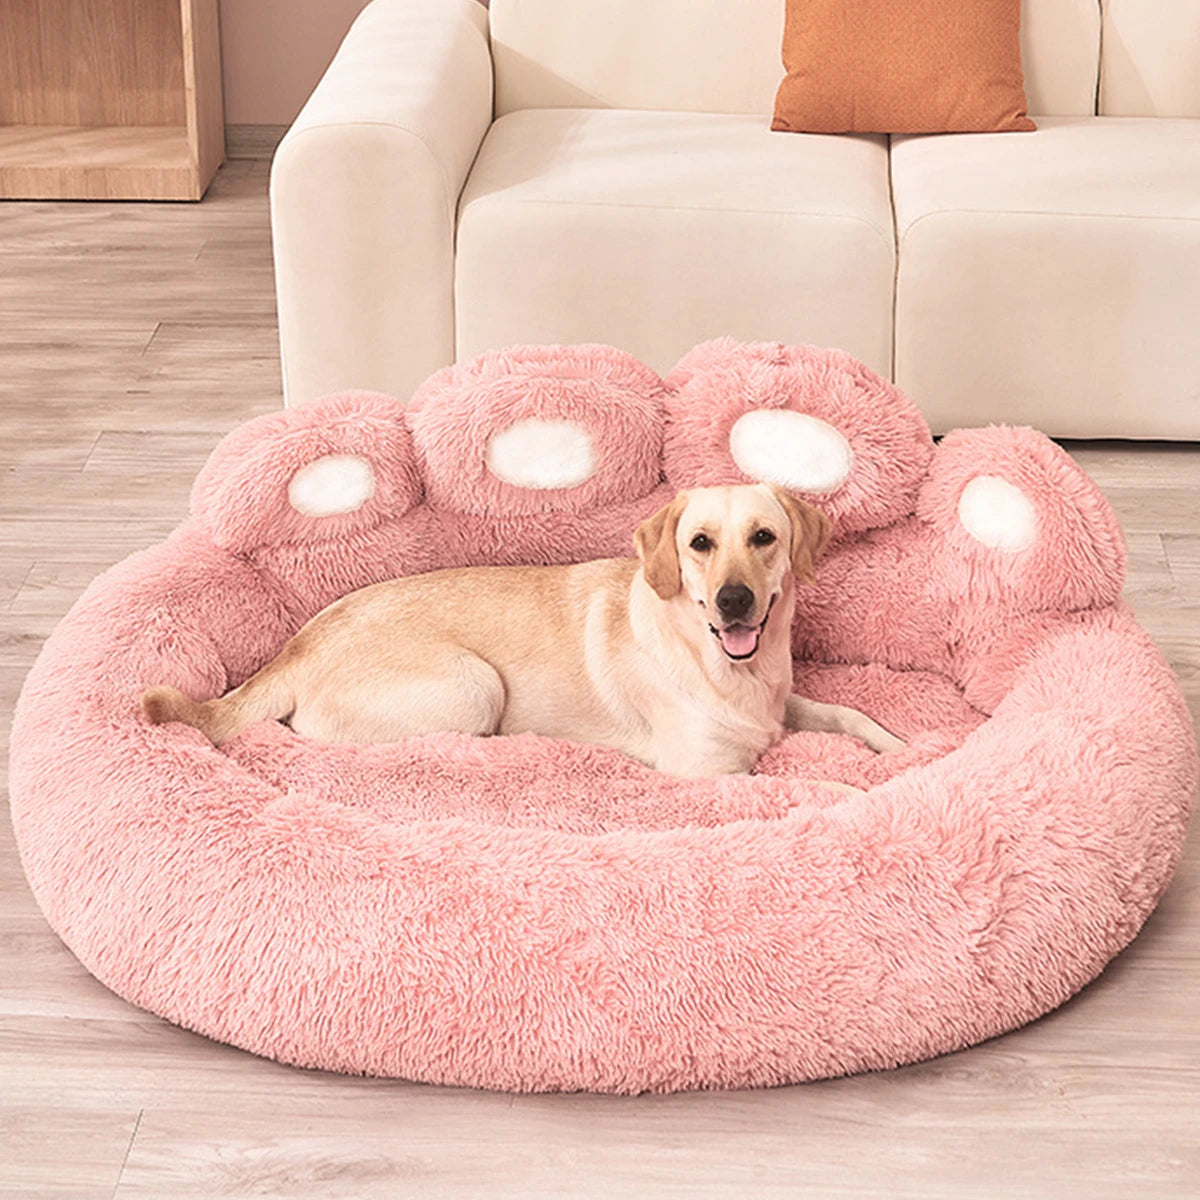 Washable plush sofa bed for 90cm dogs and cats - 3 colors